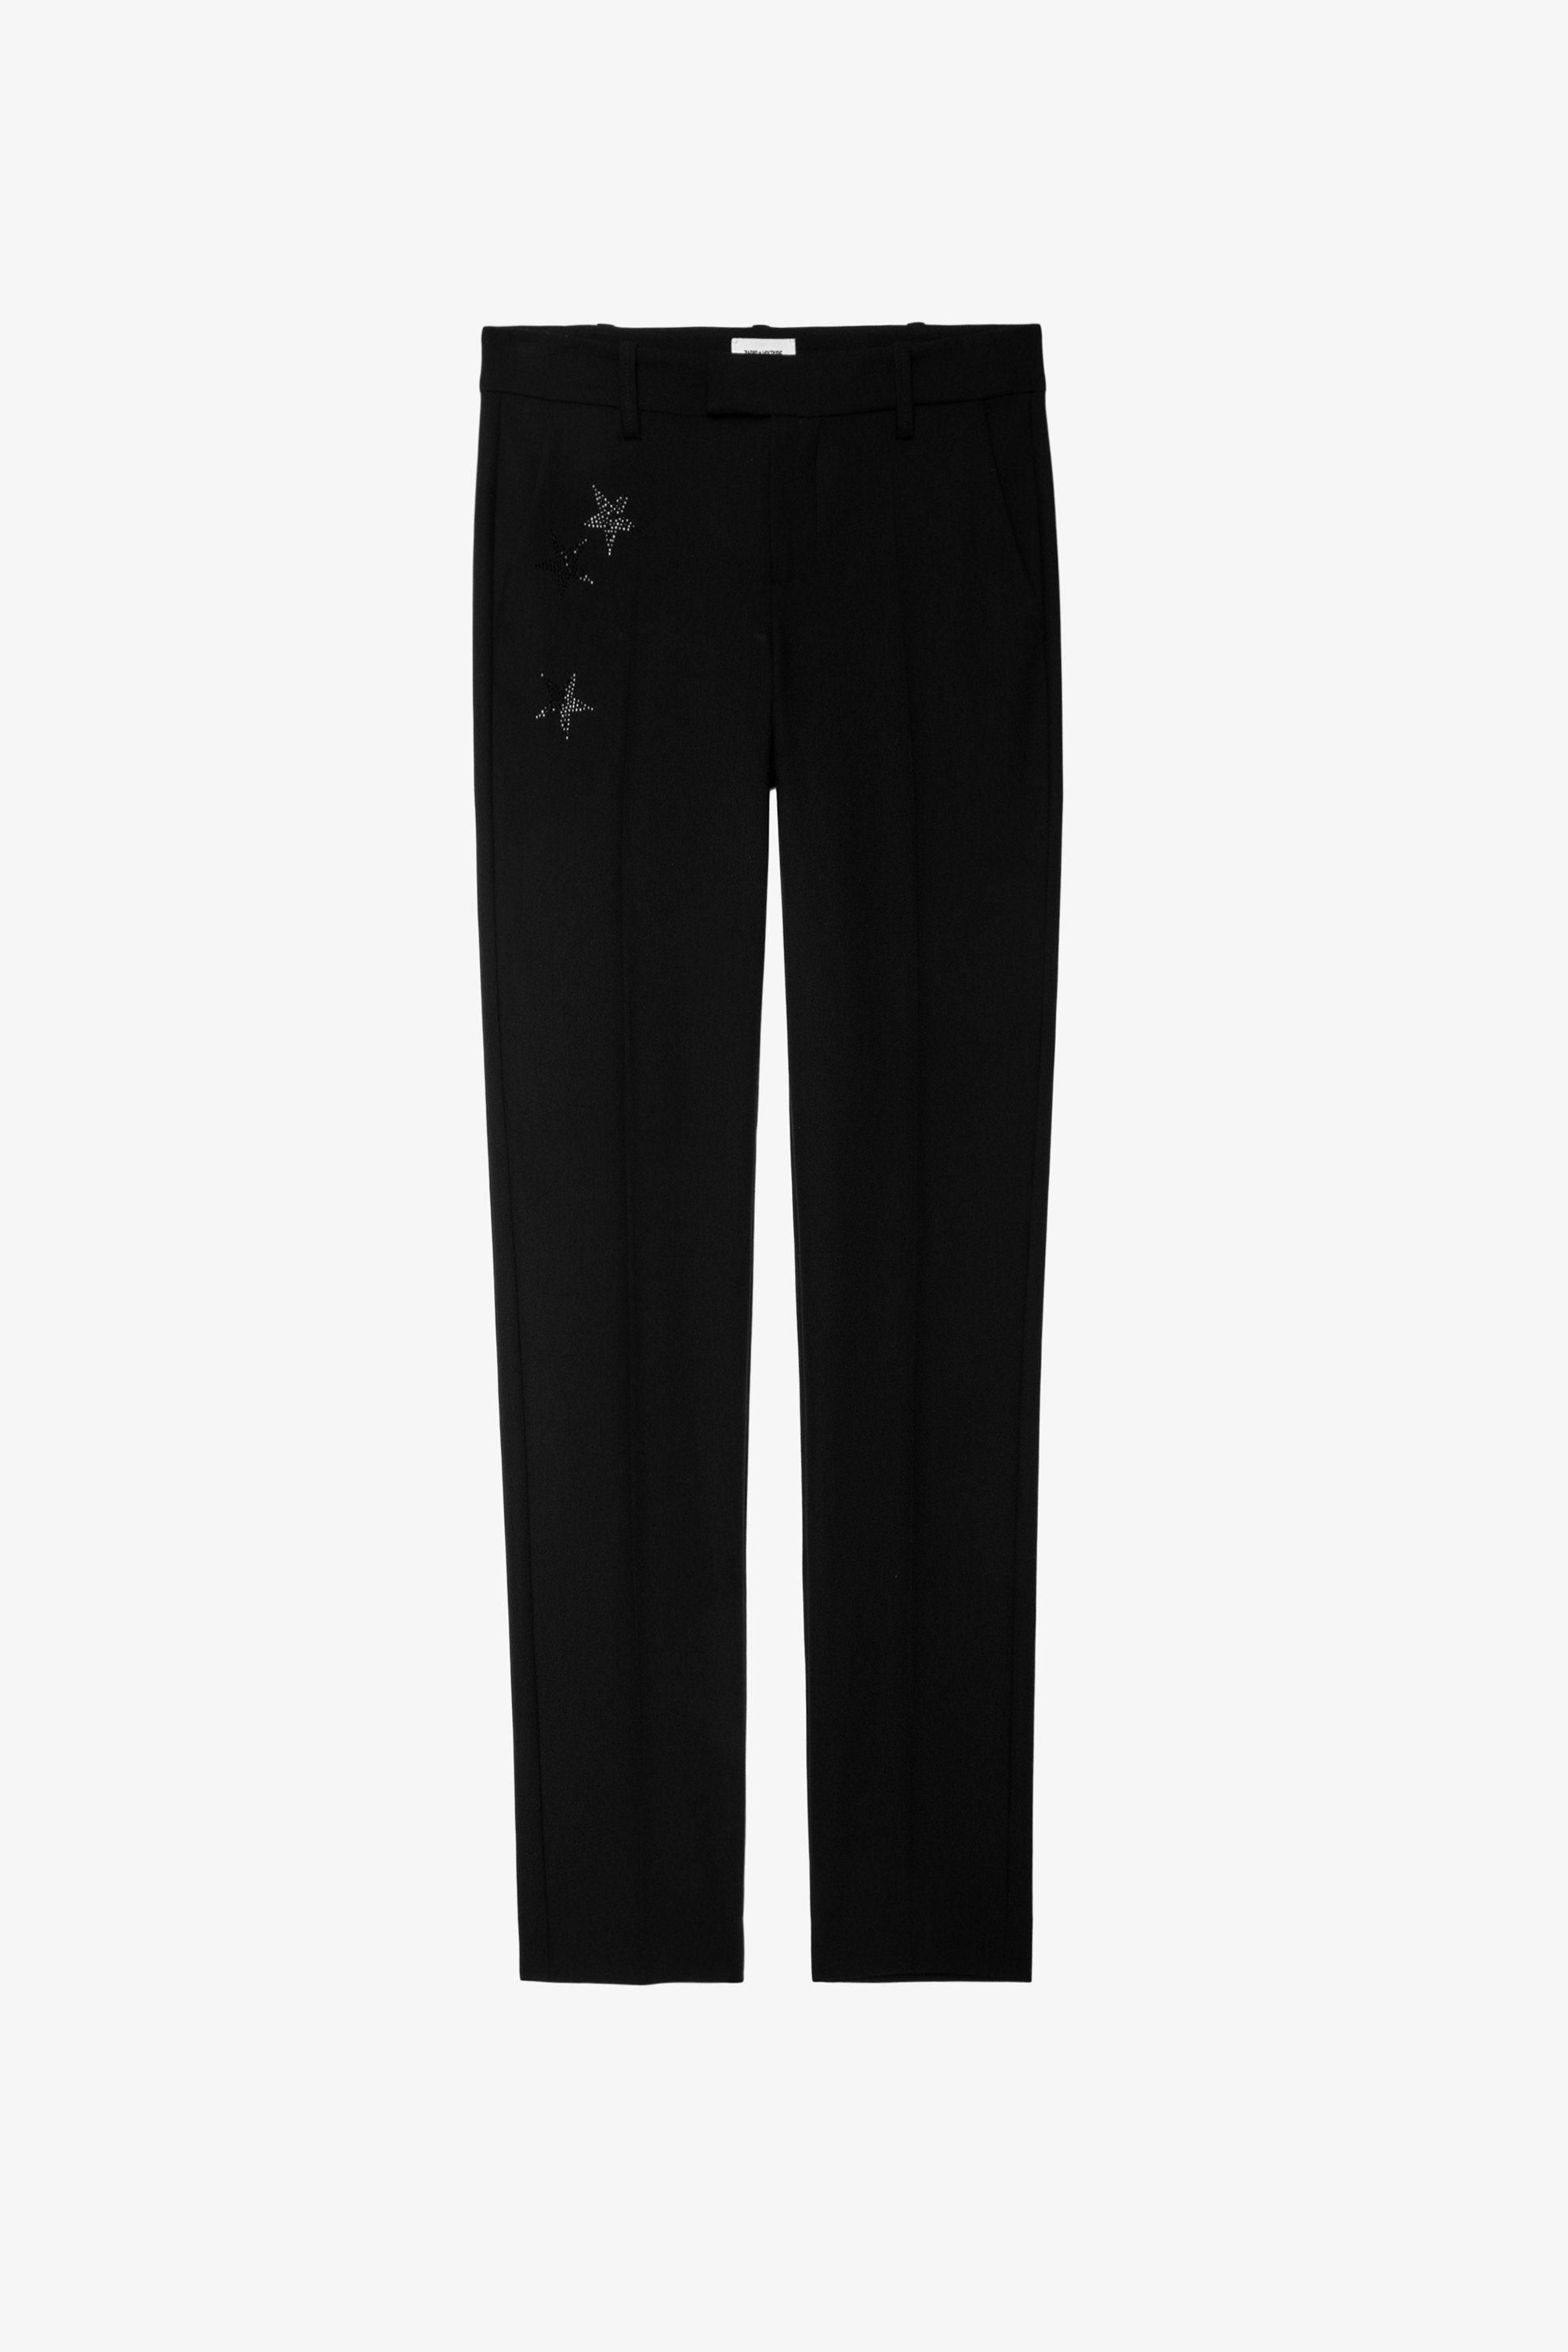 Prune Strass Star パンツ Woman’s Zadig&Voltaire black suit trousers with rhinestone stars on the pocket.